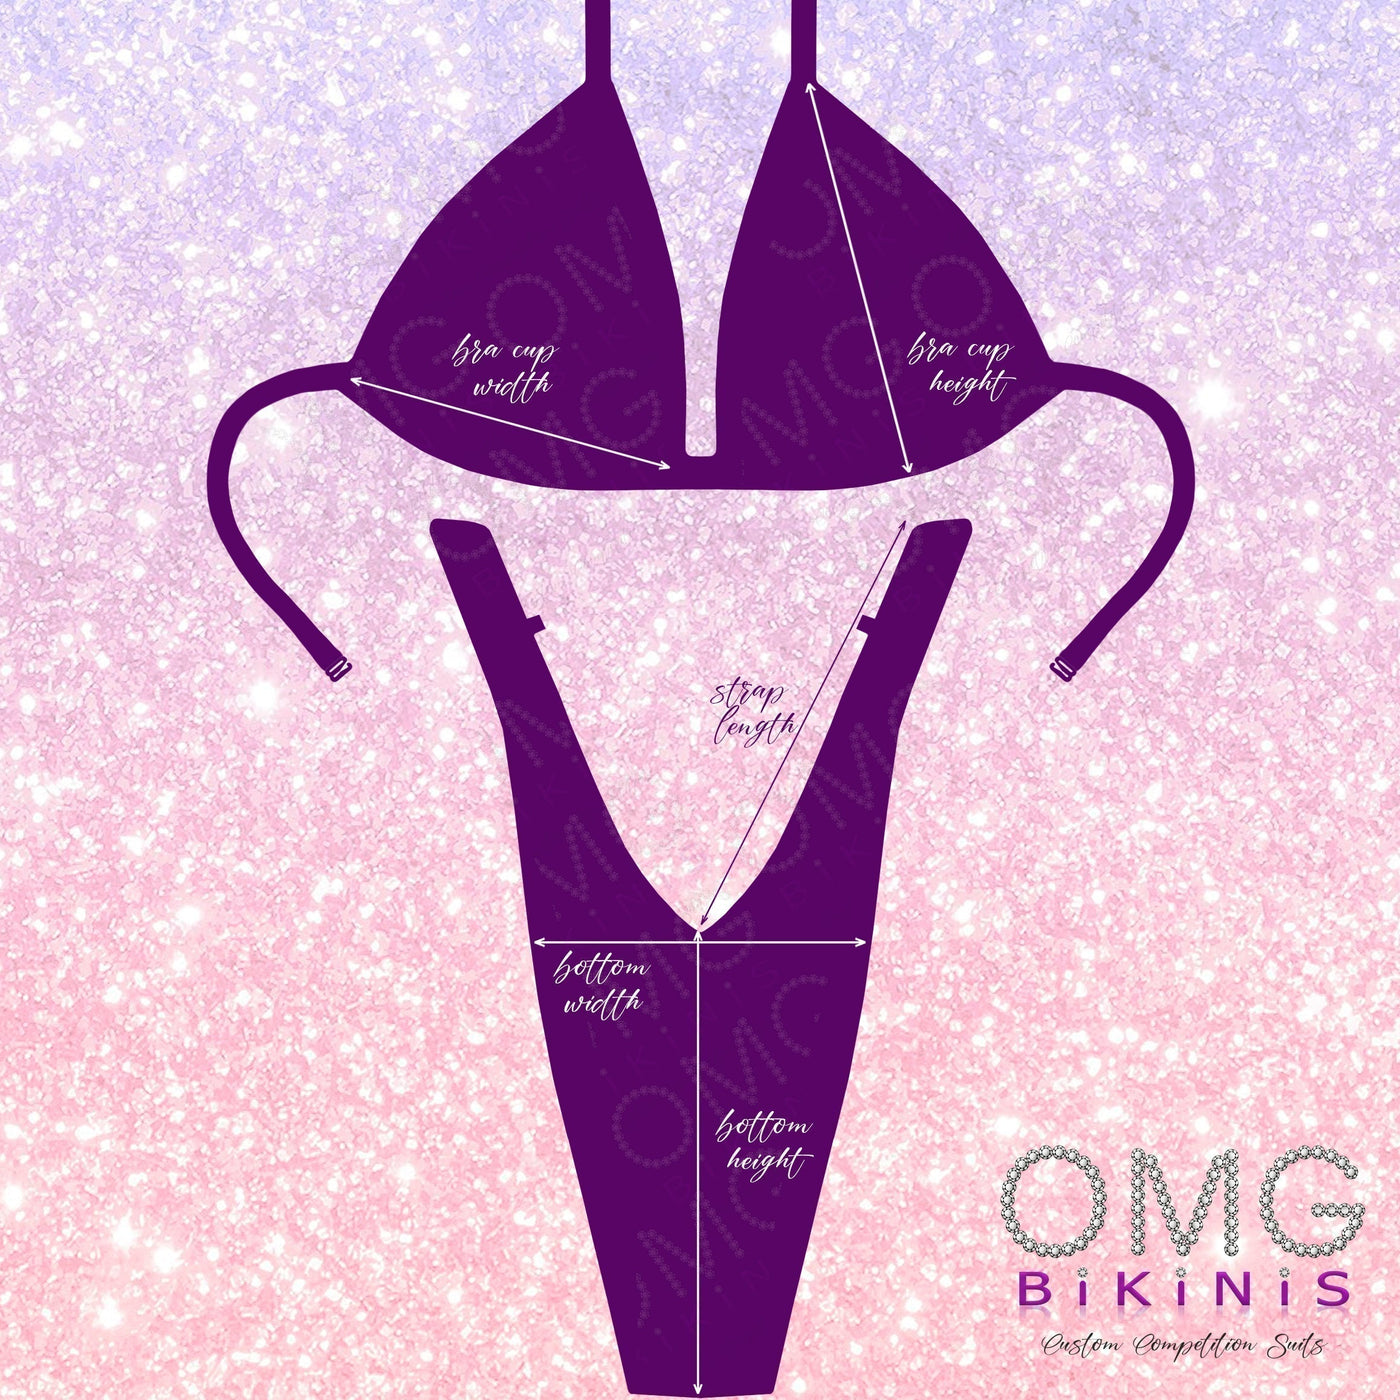 Kendall Figure/WPD Competition Suit S/S | OMG Bikinis Rentals